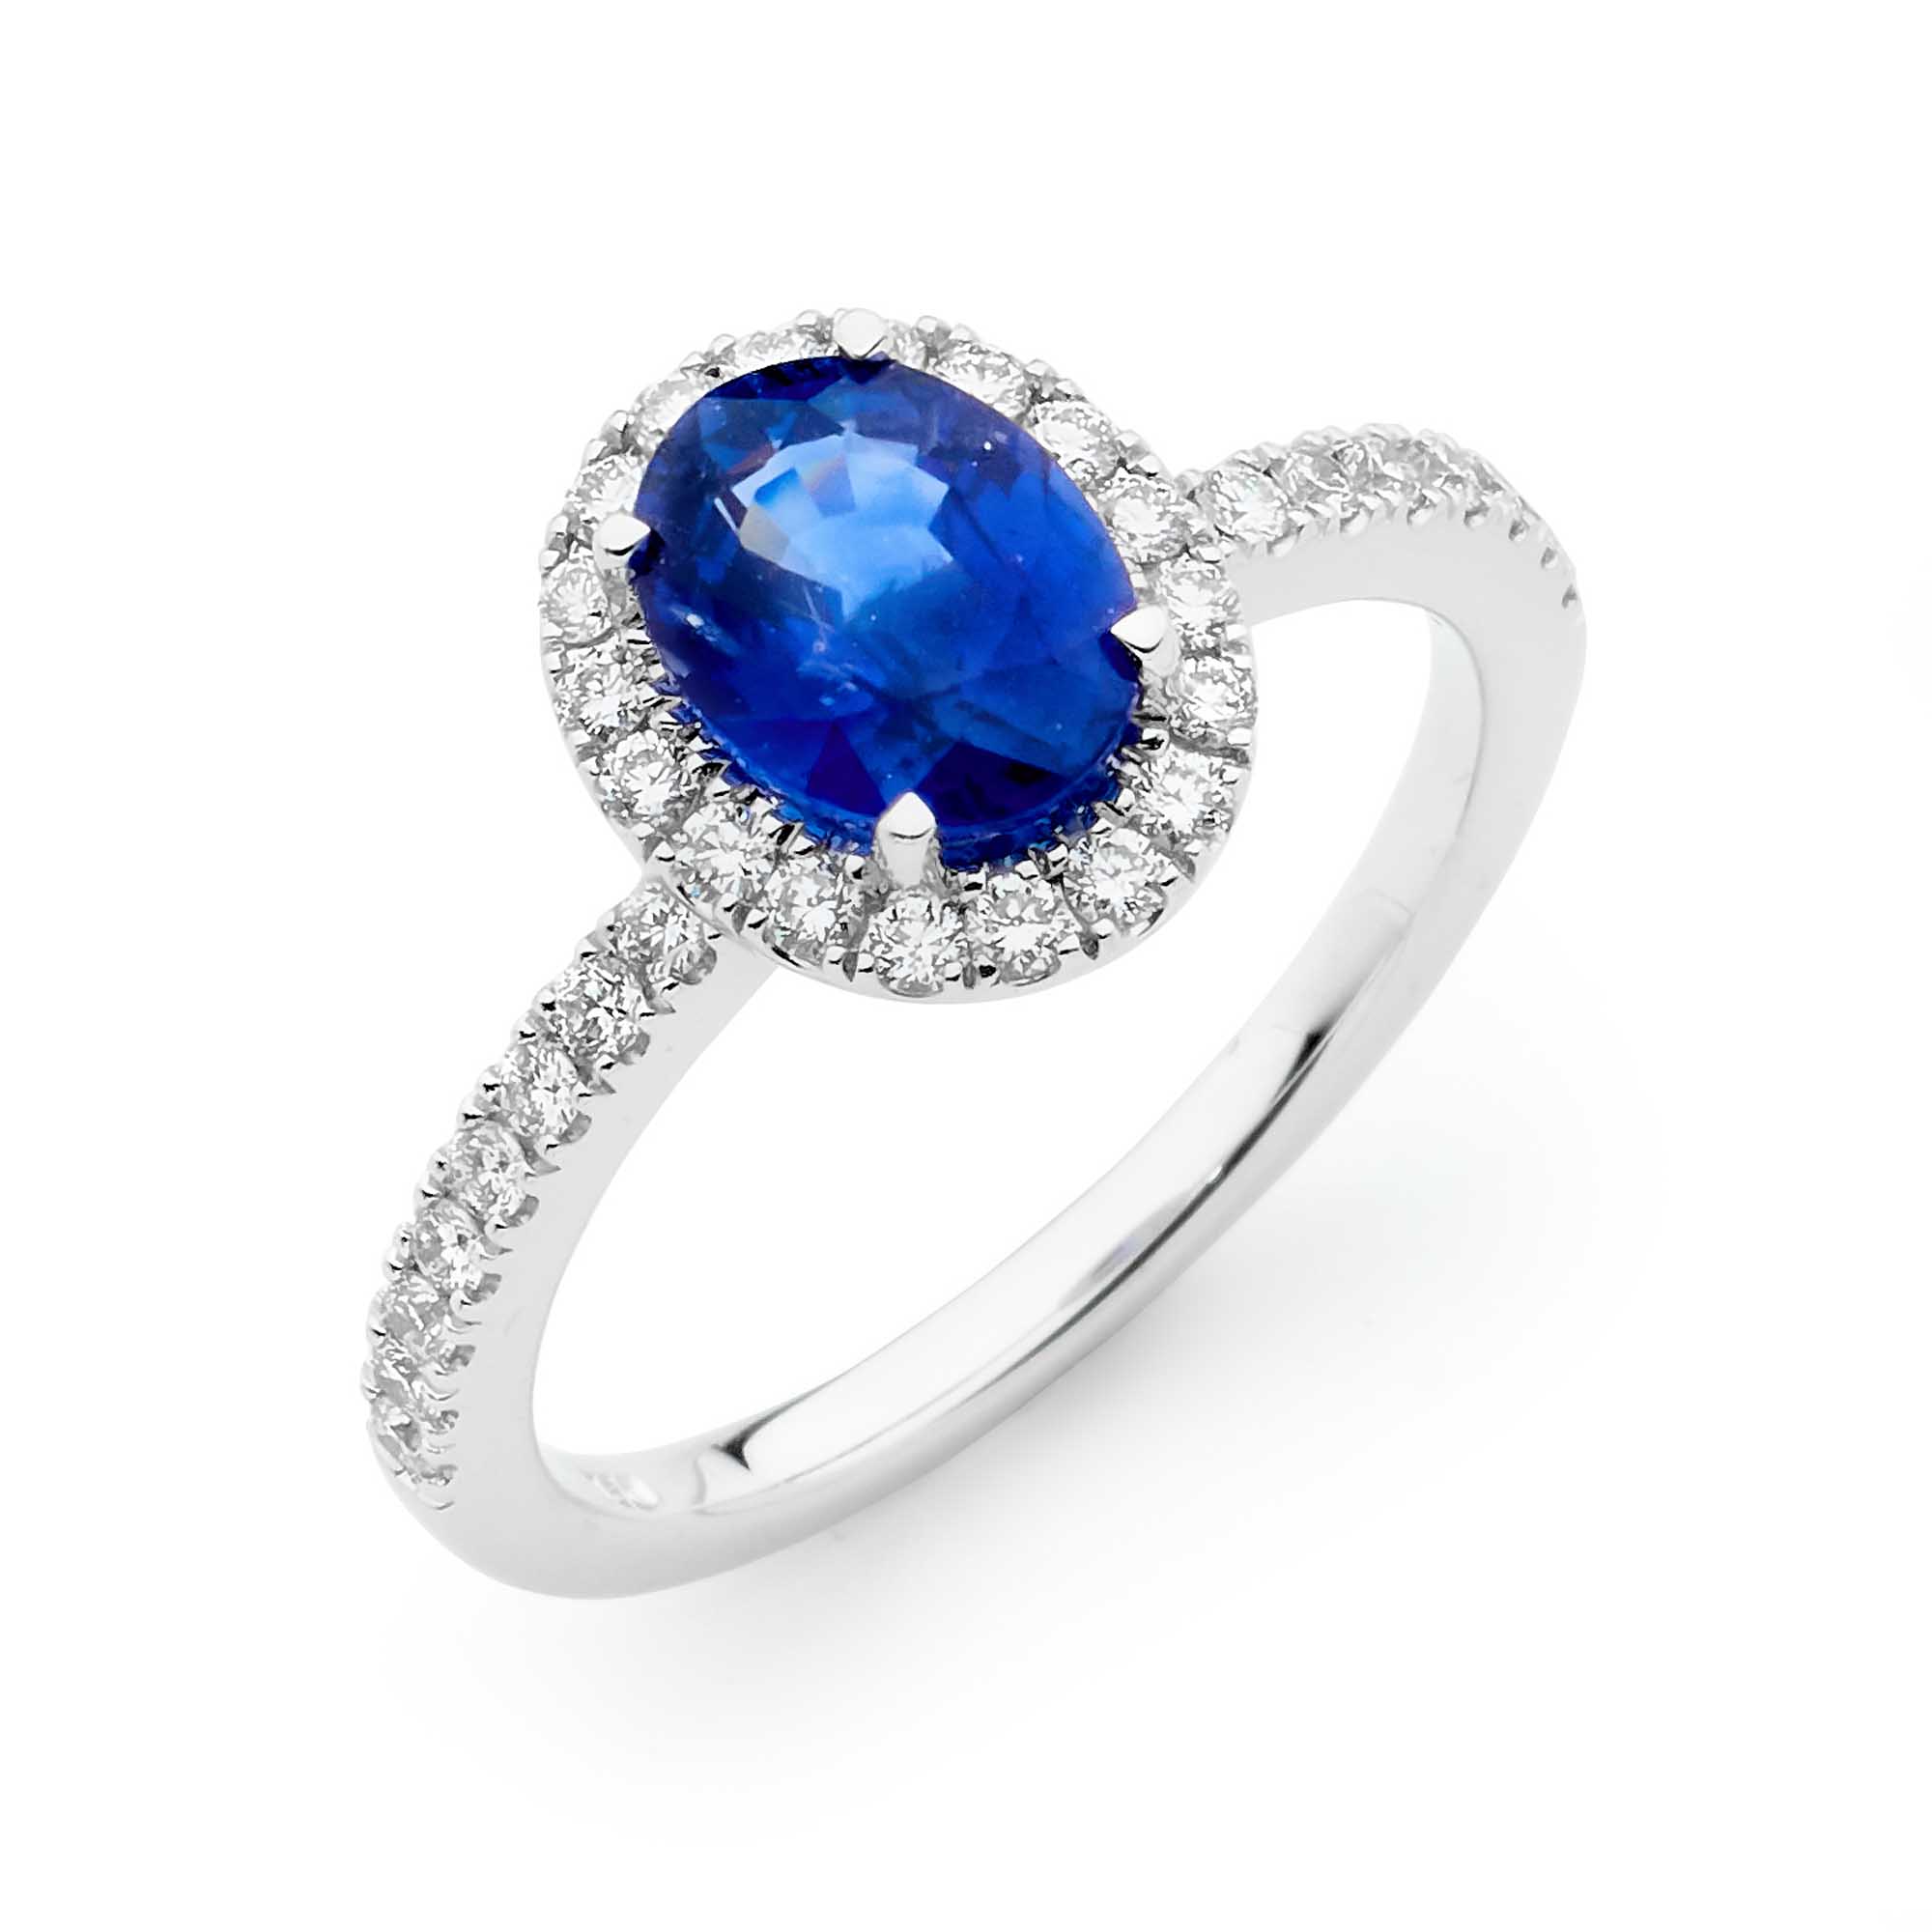 Oval Sapphire and Diamond Ring | Perth Mint Jewellery Store